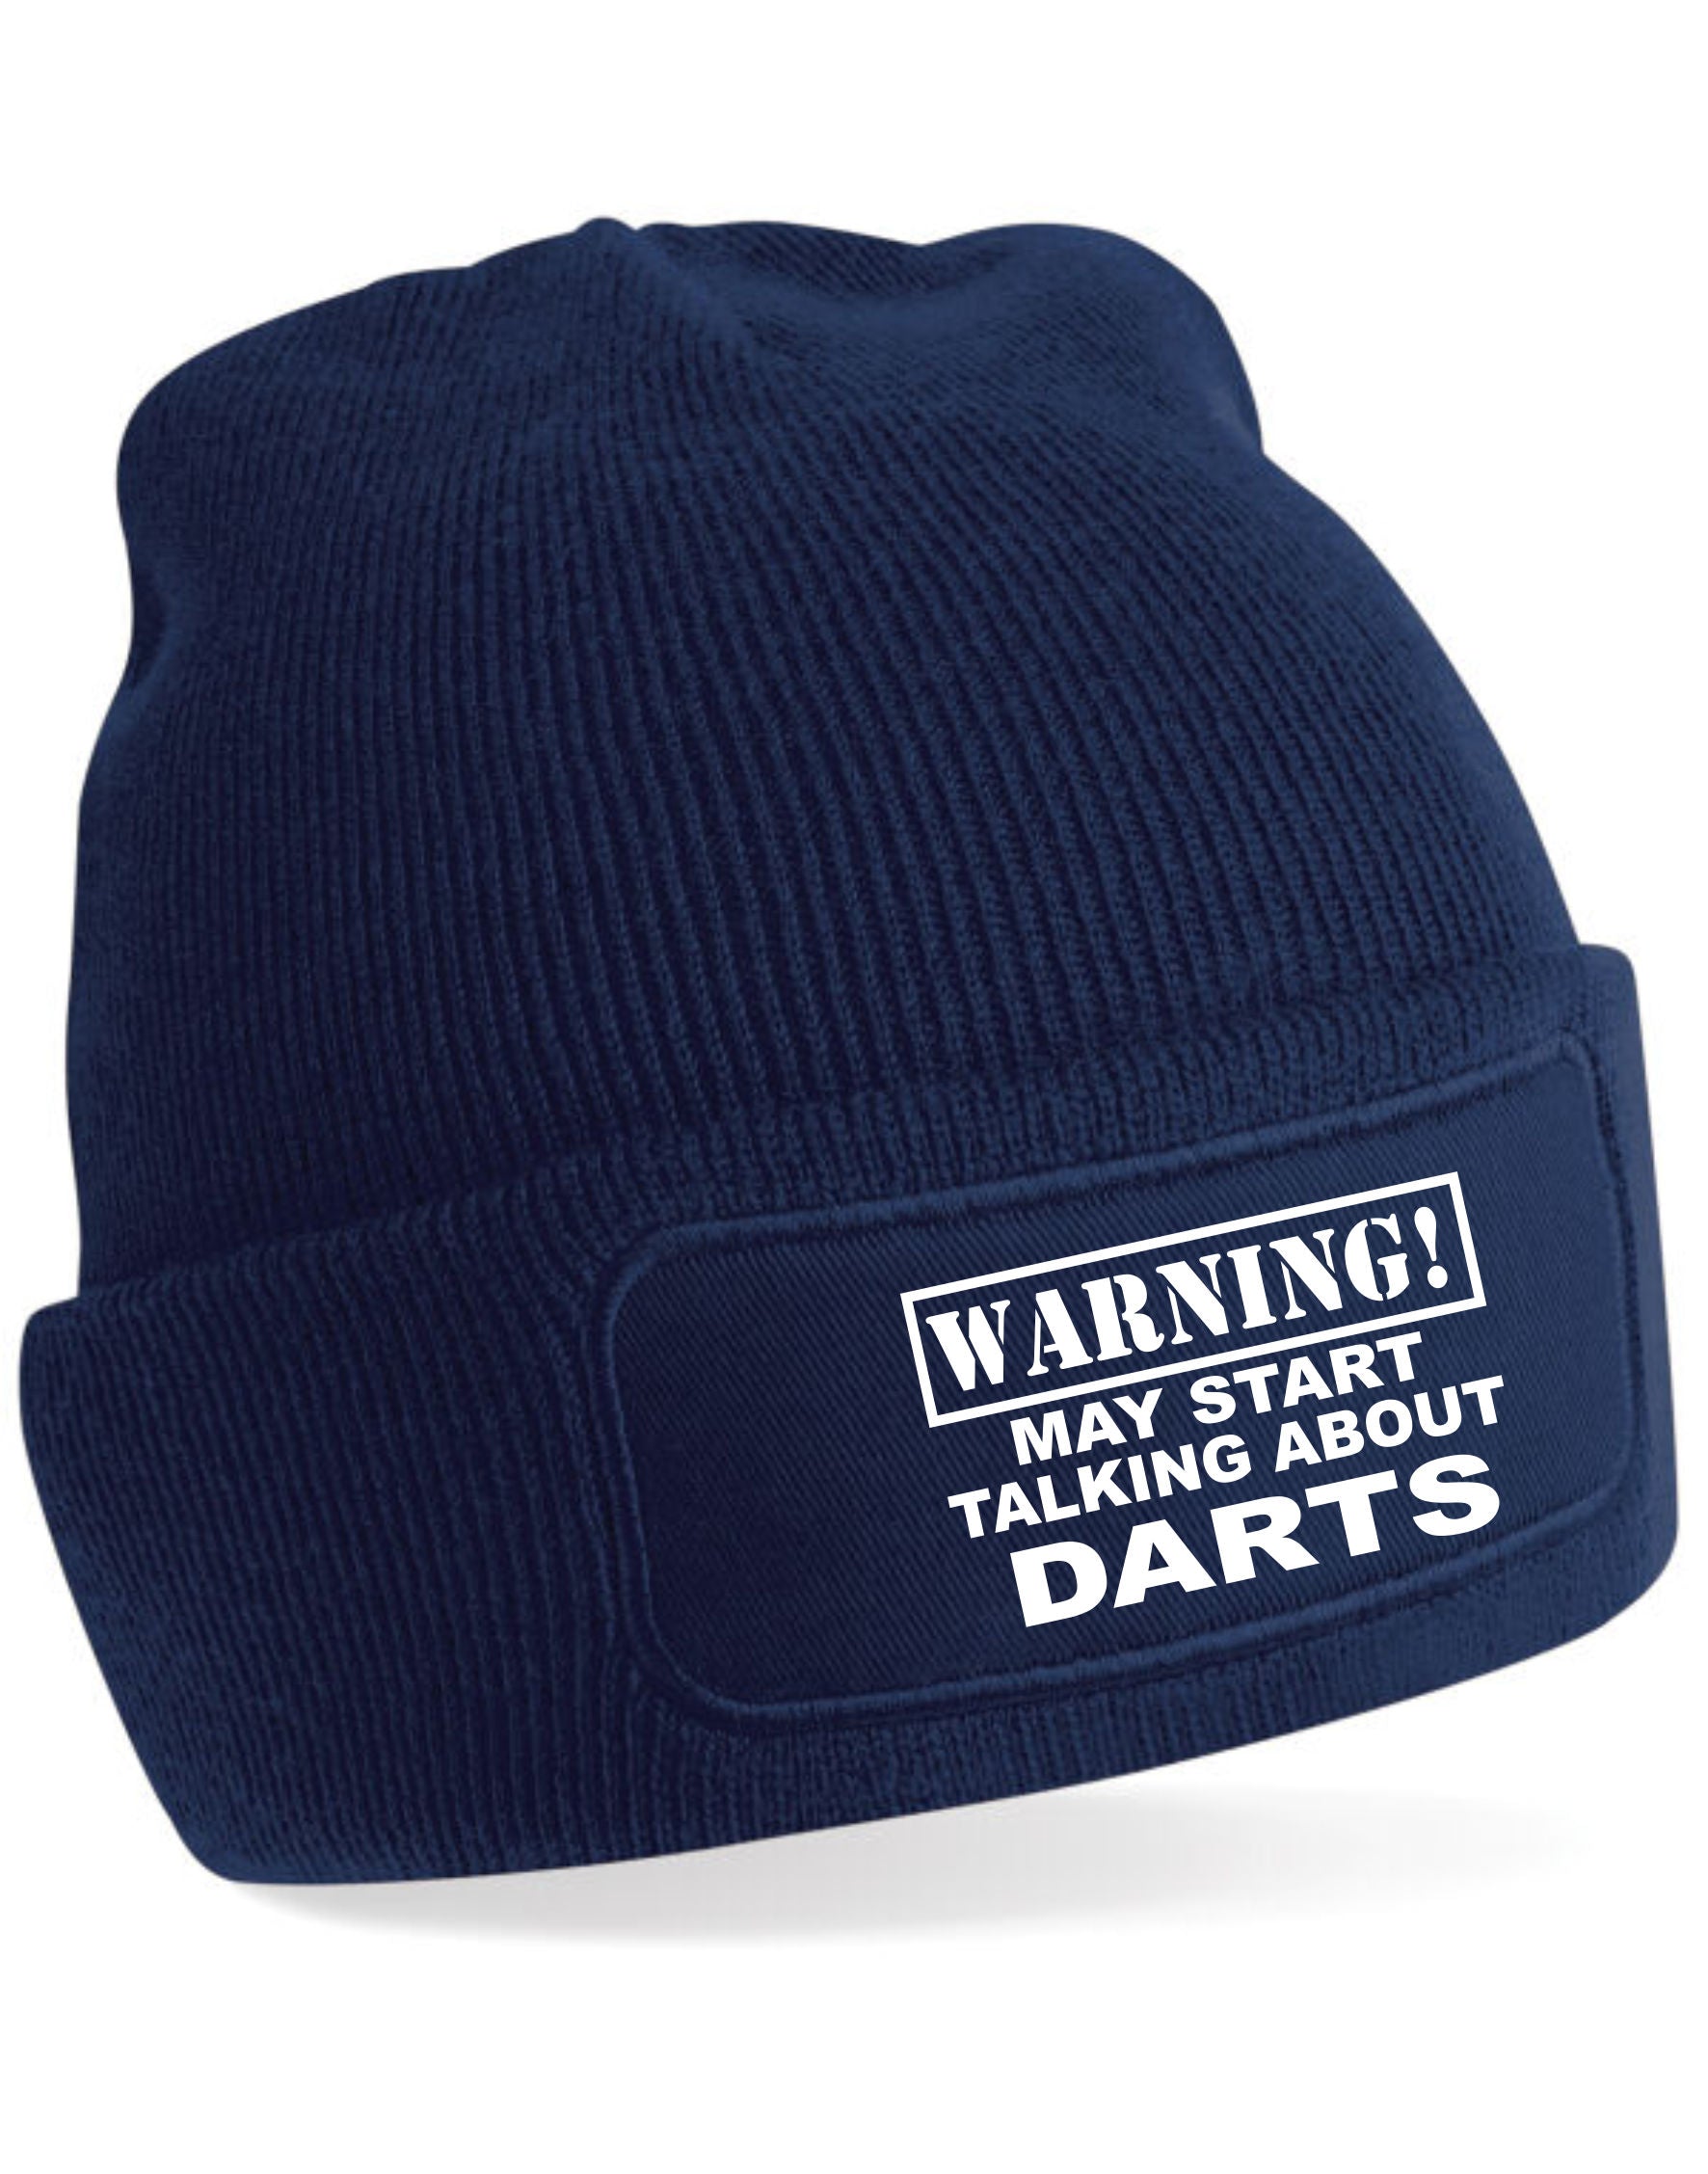 May Talk About Darts Hat Great Sports Gift For Men & Ladies